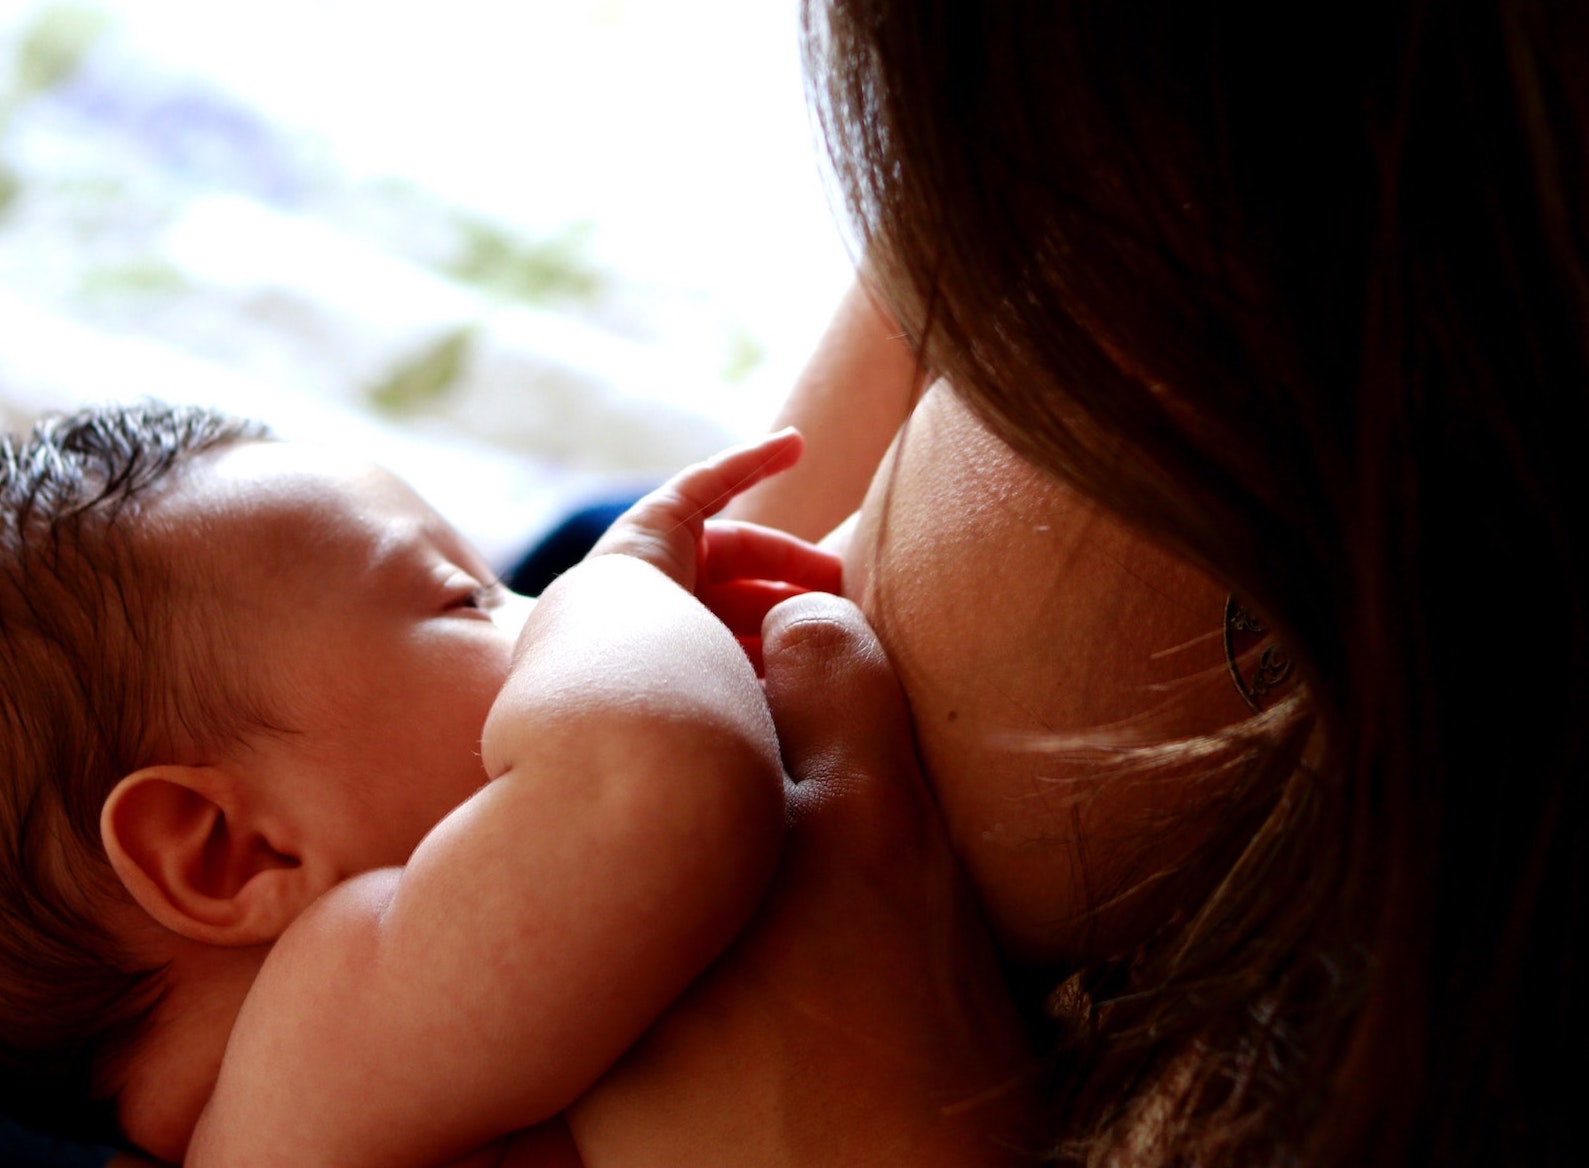 Breastfeeding Diet: What to Eat When You’re Breastfeeding